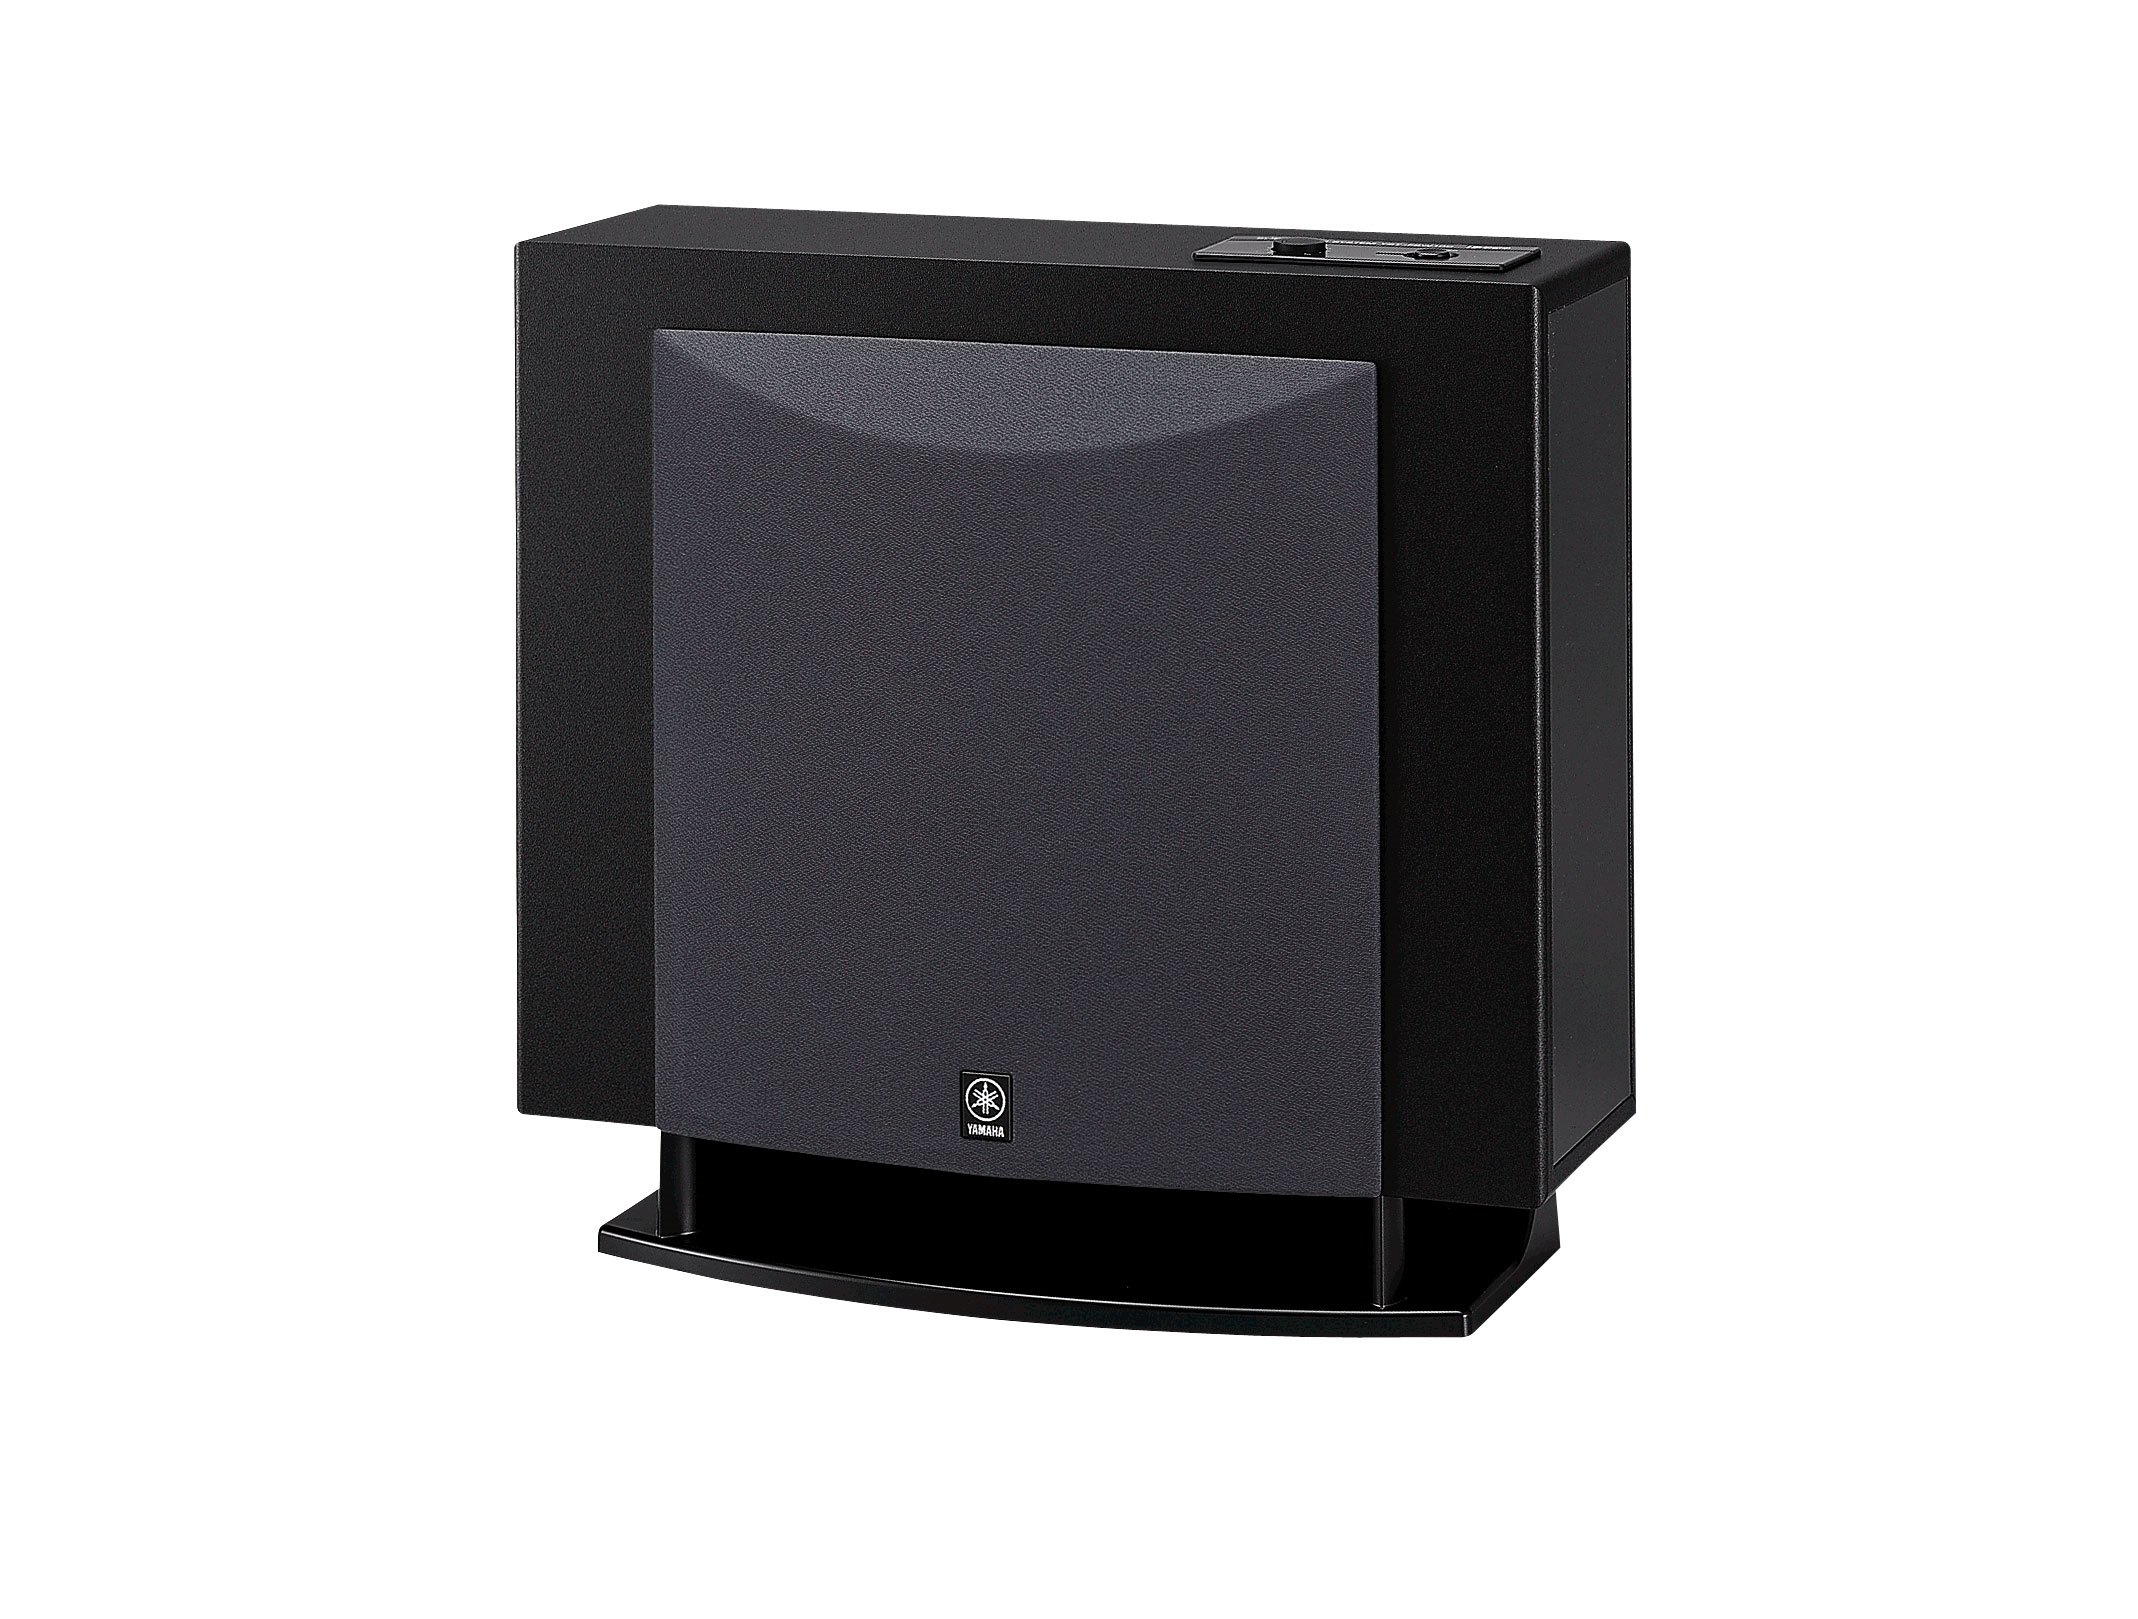 NS-SP7800PN - 5.1-CH Home Theater Speaker Sys